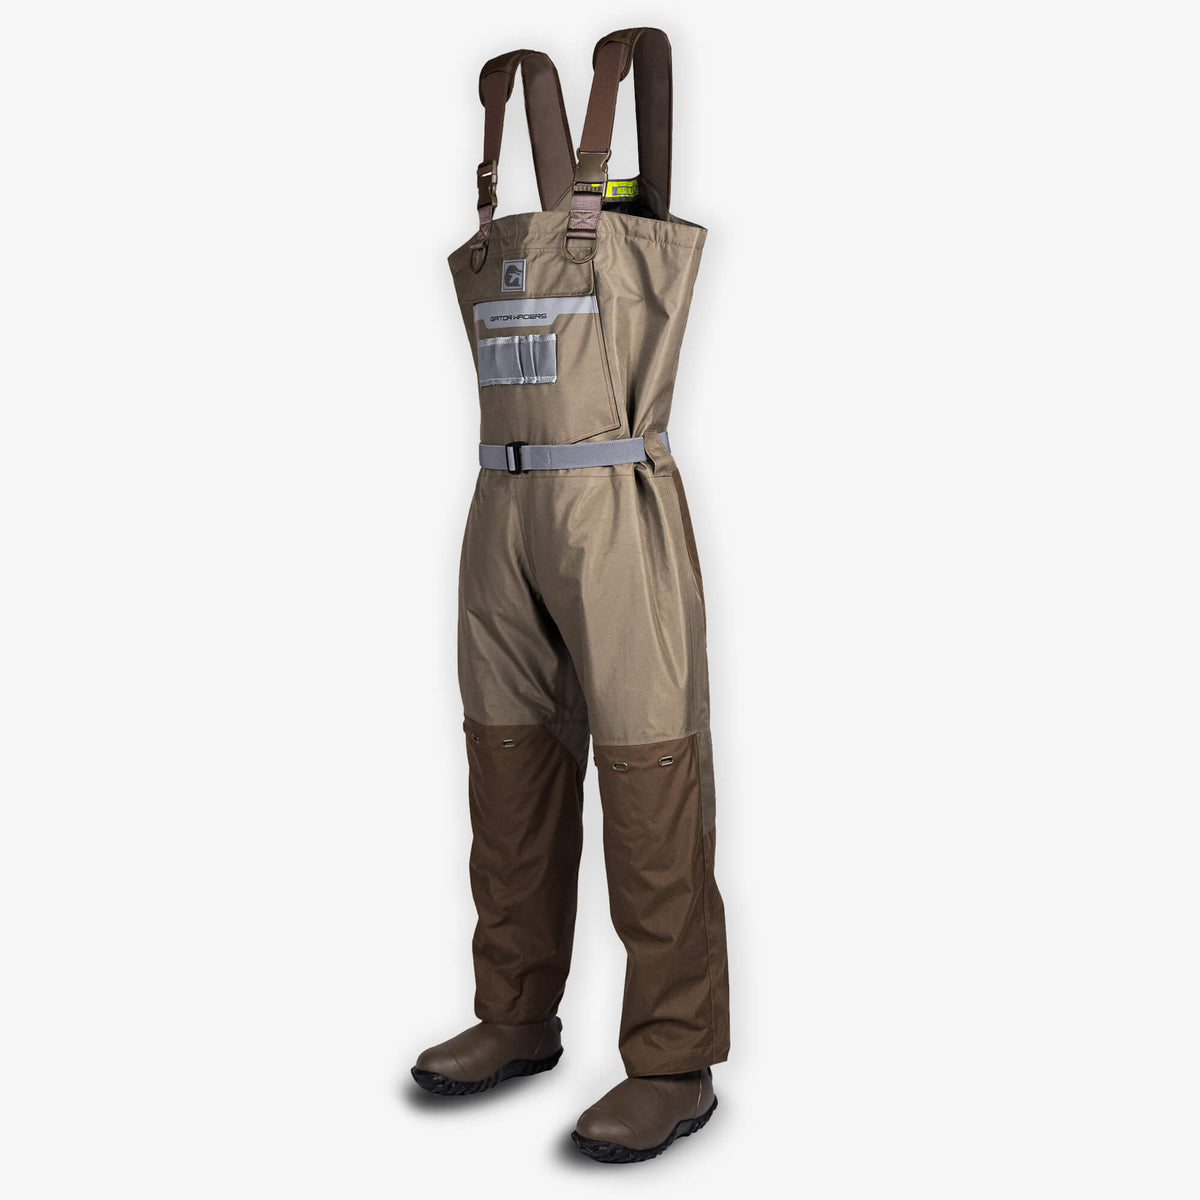 https://cdn.shopify.com/s/files/1/0159/1040/products/Gator_Waders_Shield_Waders_BROWN_Front_1_1200x.jpg?v=1667930681